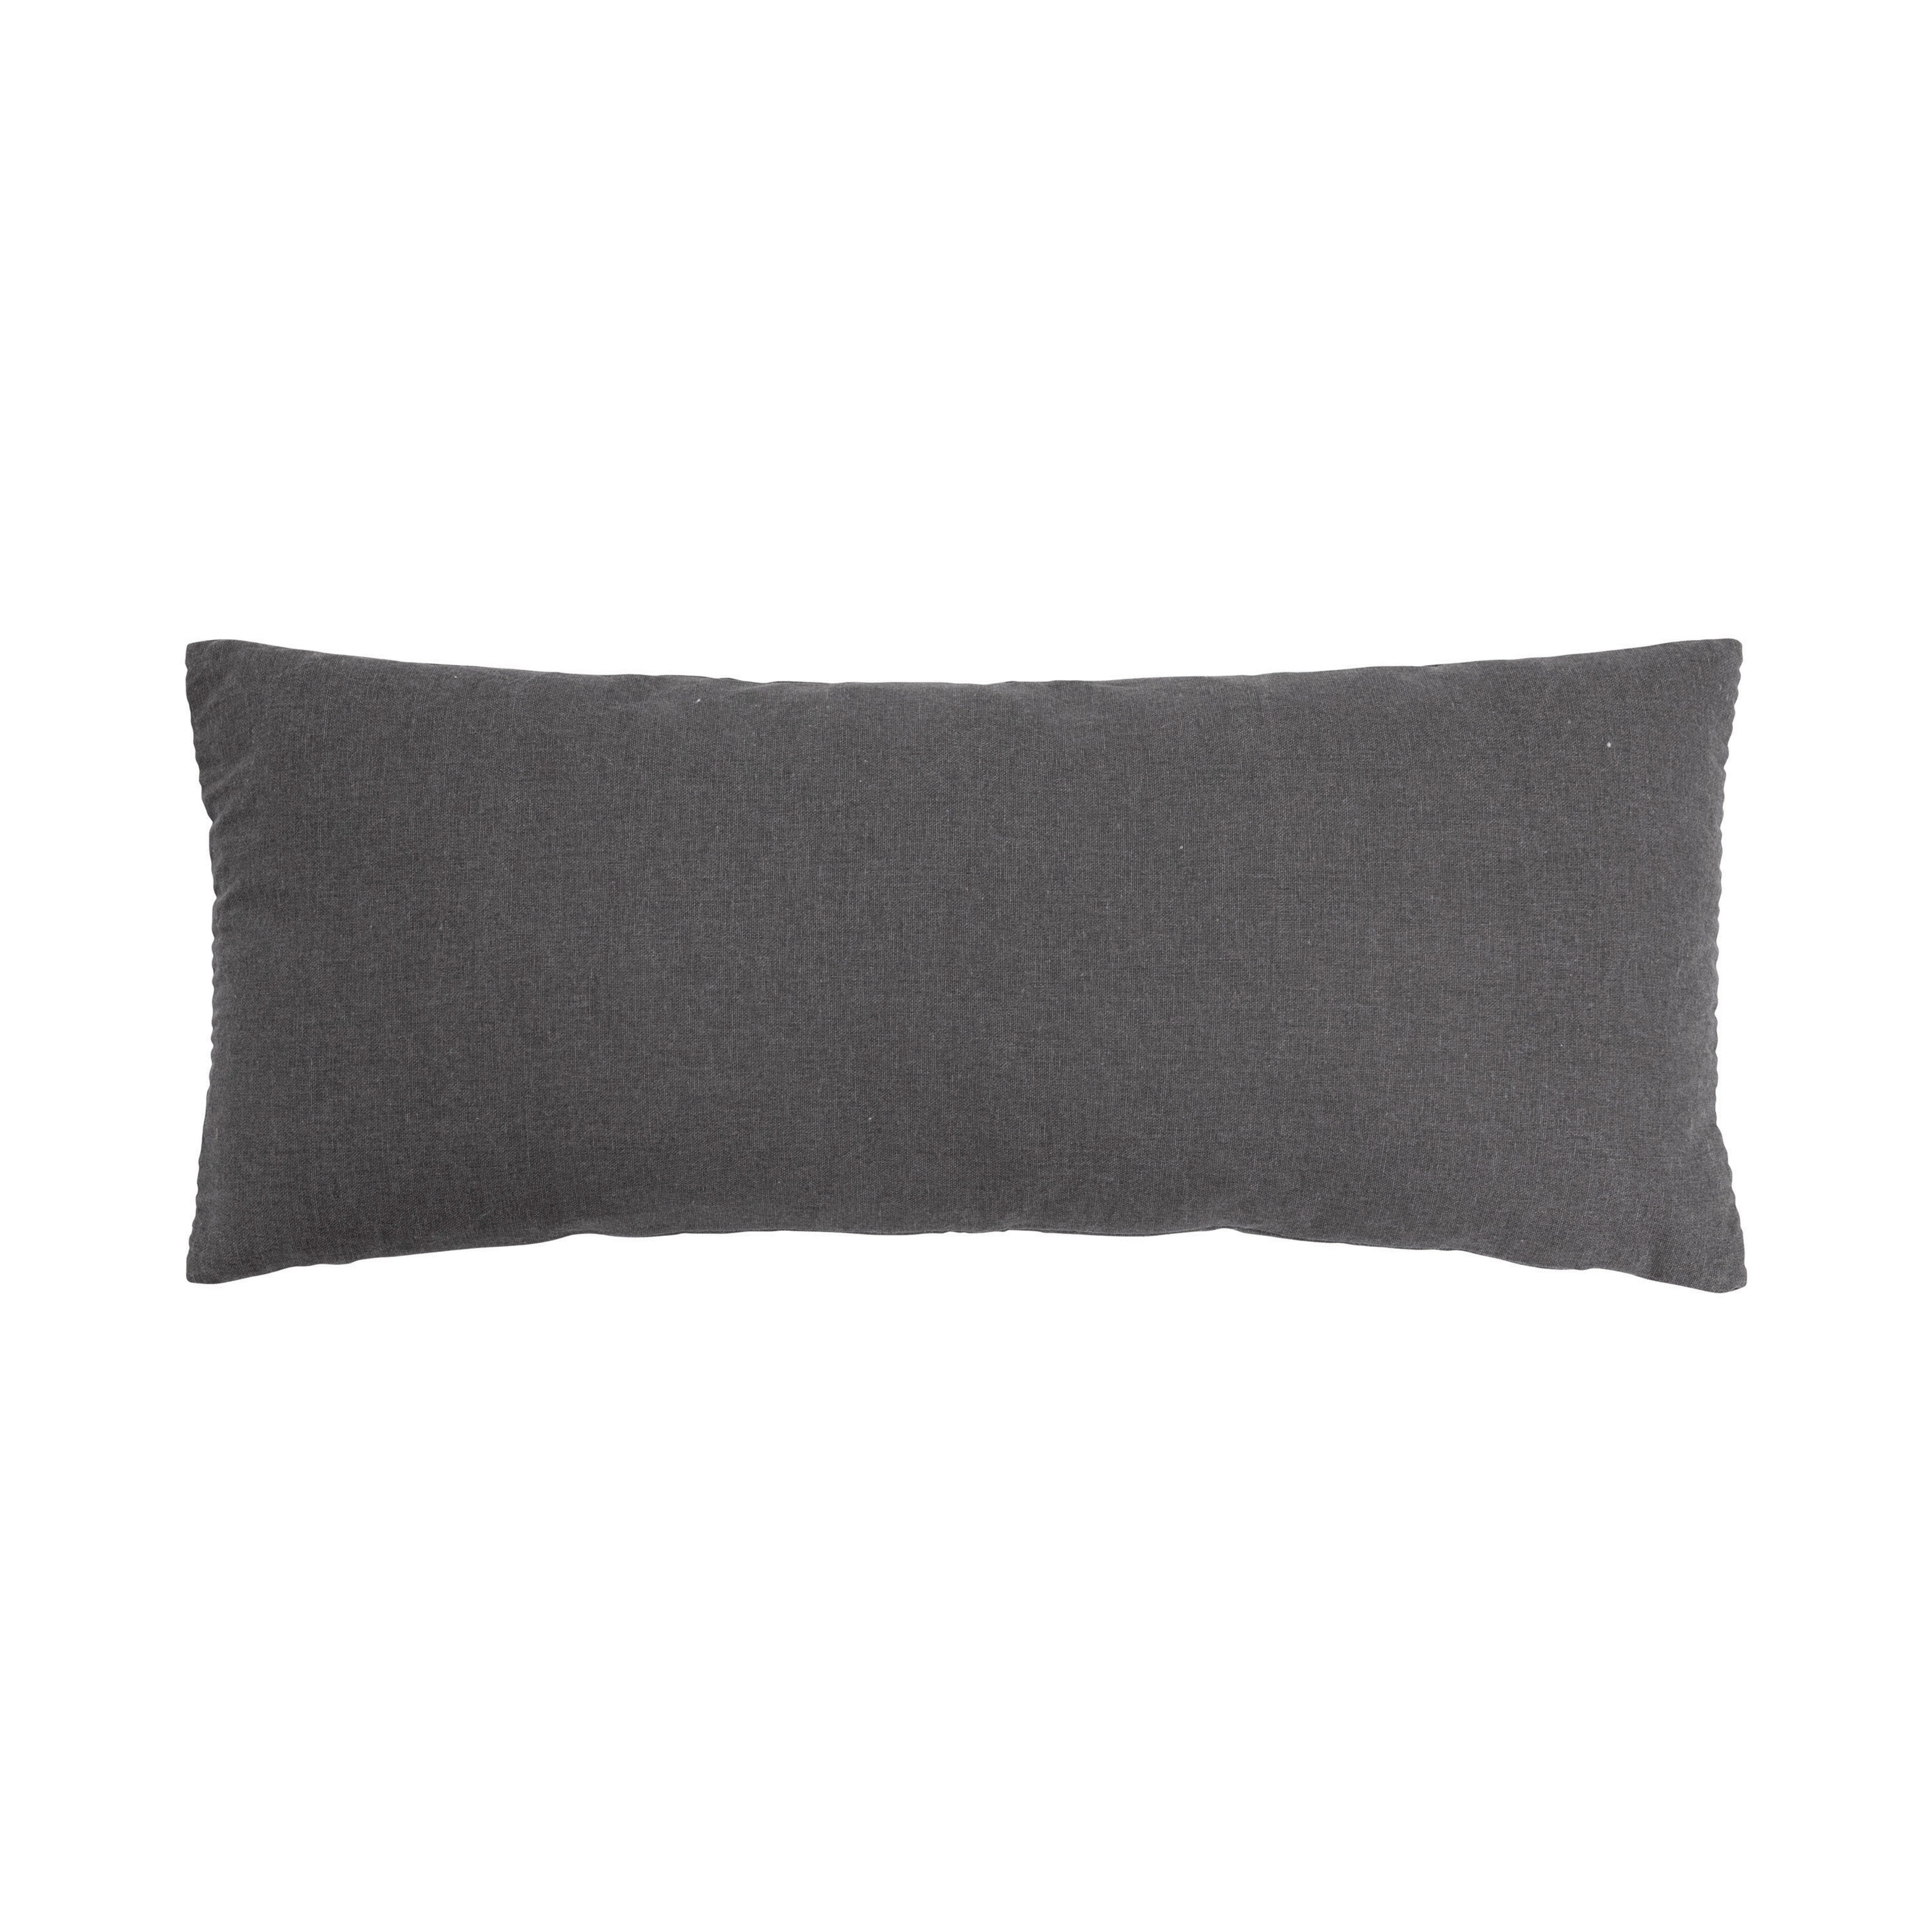 Pillow, Evelyn - Danshire Market and Design 